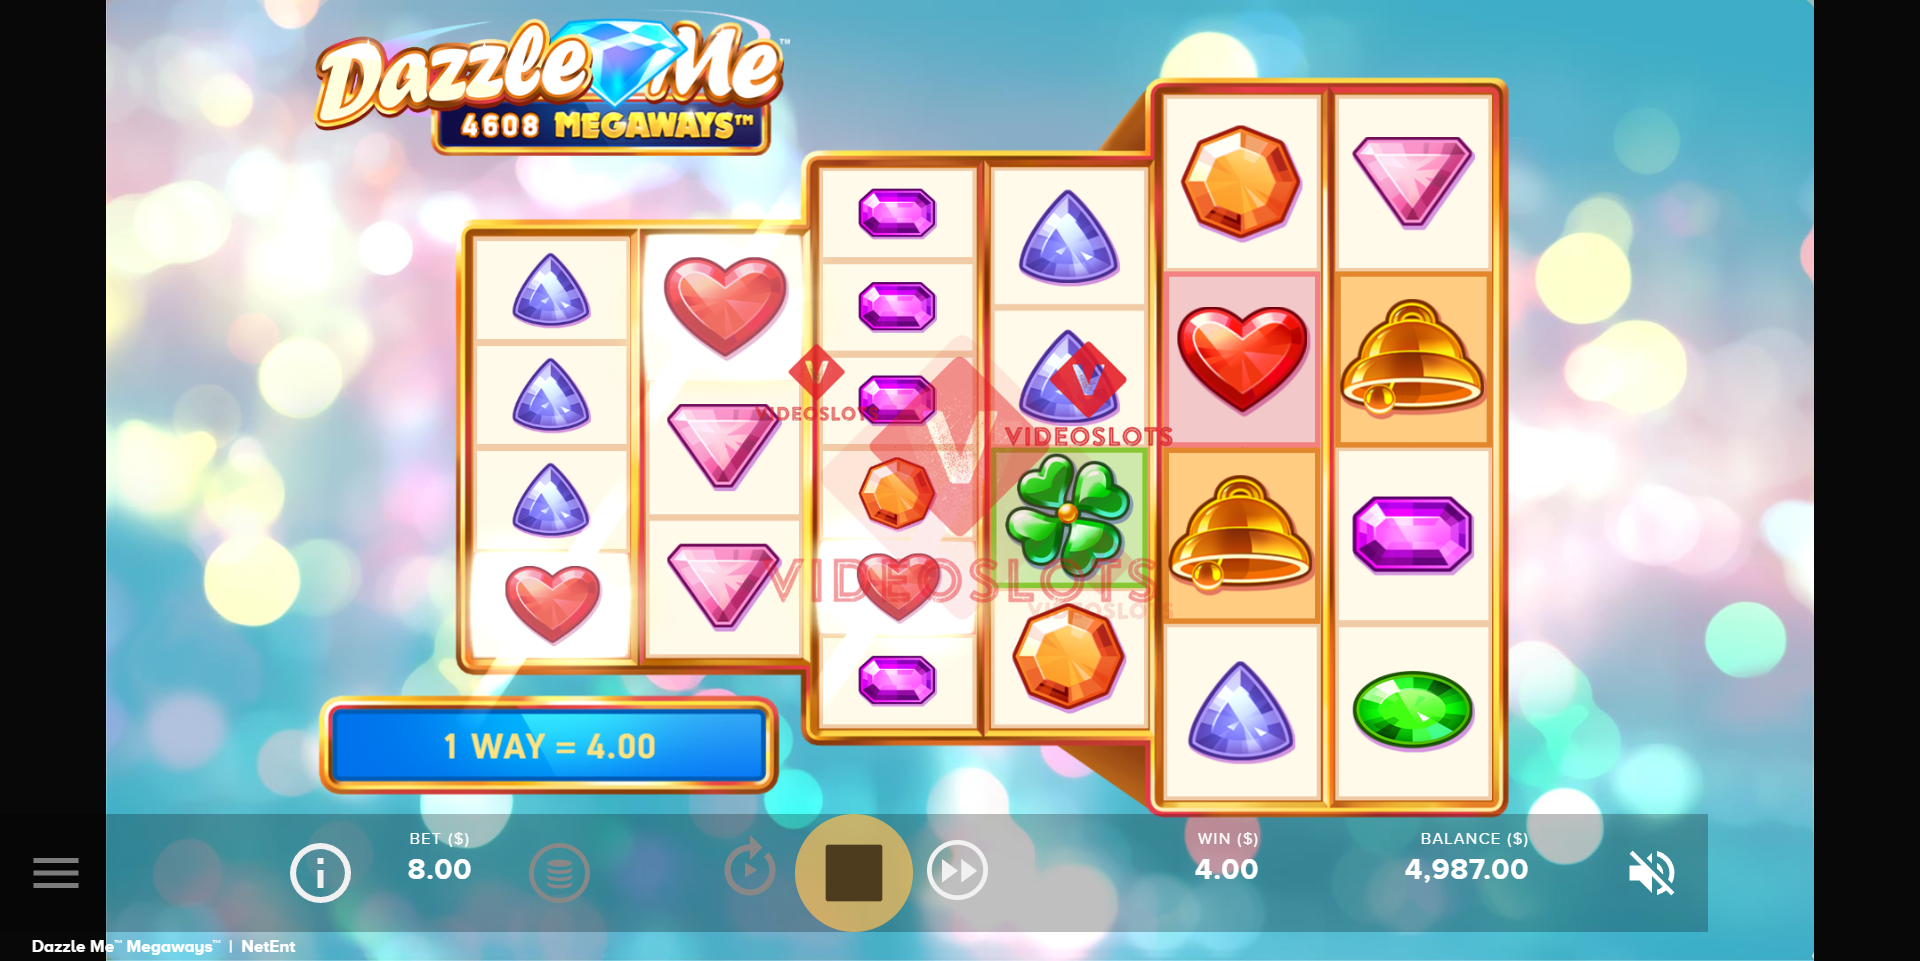 Base Game for Dazzle Me Megaways slot from NetEnt